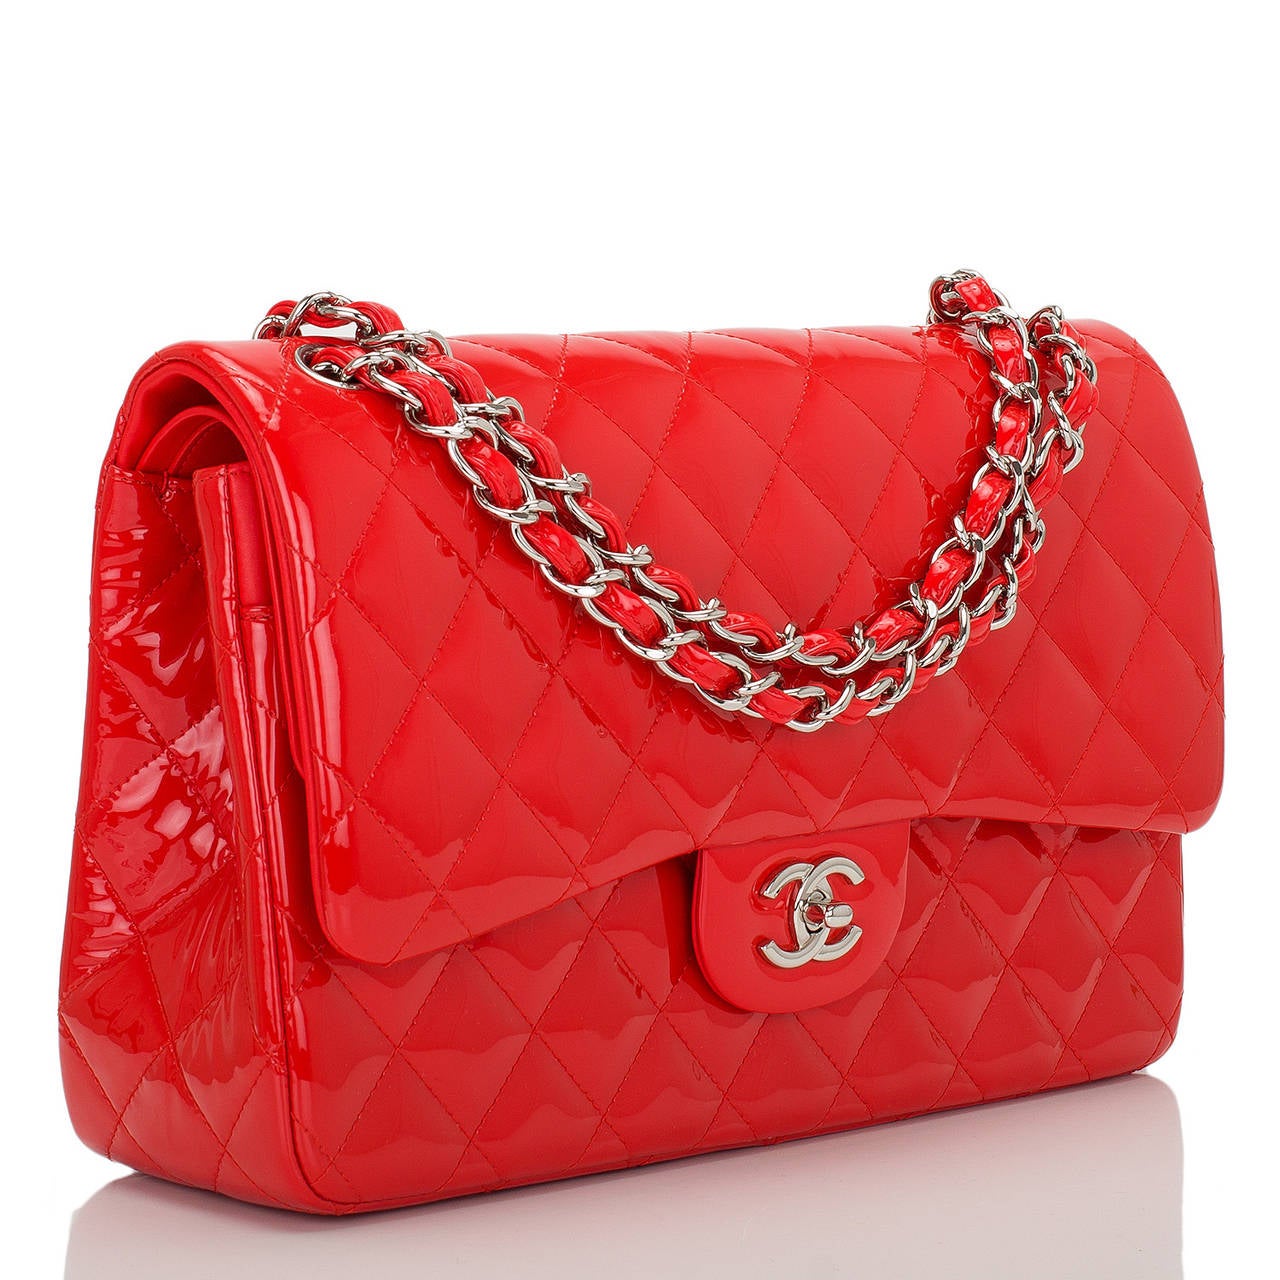 This limited edition Jumbo Classic double flap bag of bright red quilted patent leather with silver tone hardware features a full front flap with signature CC turnlock closure, half moon back pocket, and an adjustable interwoven silver tone chain